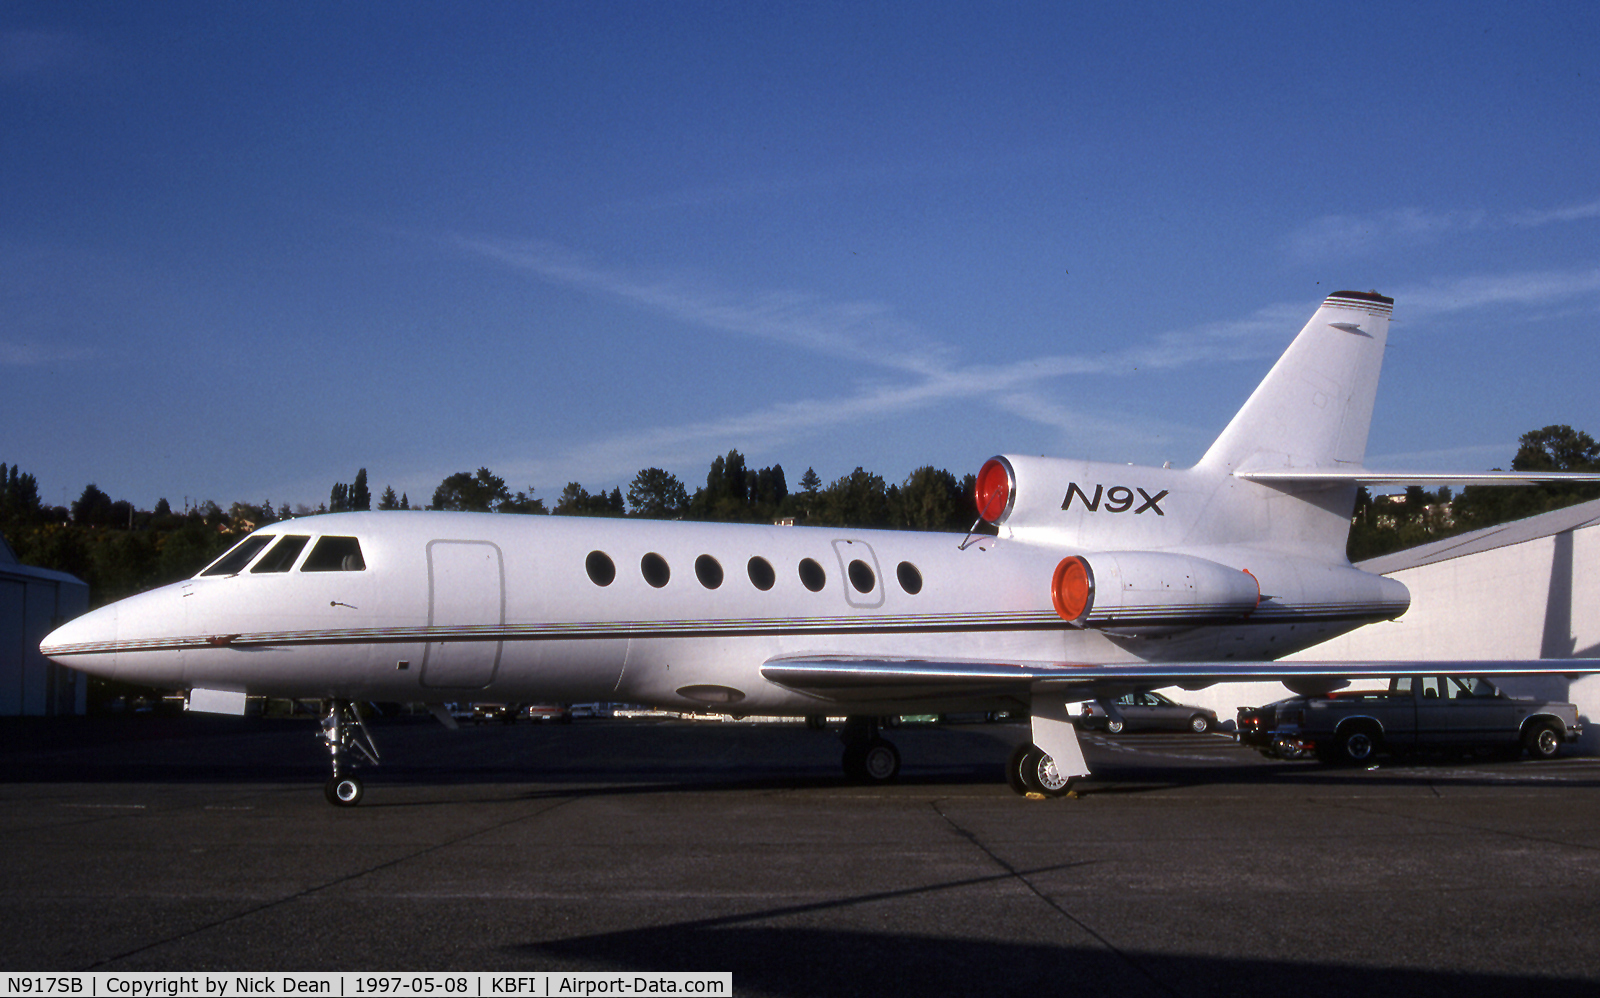 N917SB, 1980 Dassault-Breguet Falcon 50 C/N 14, (Seen here as N9X and currently registered N917SB as posted